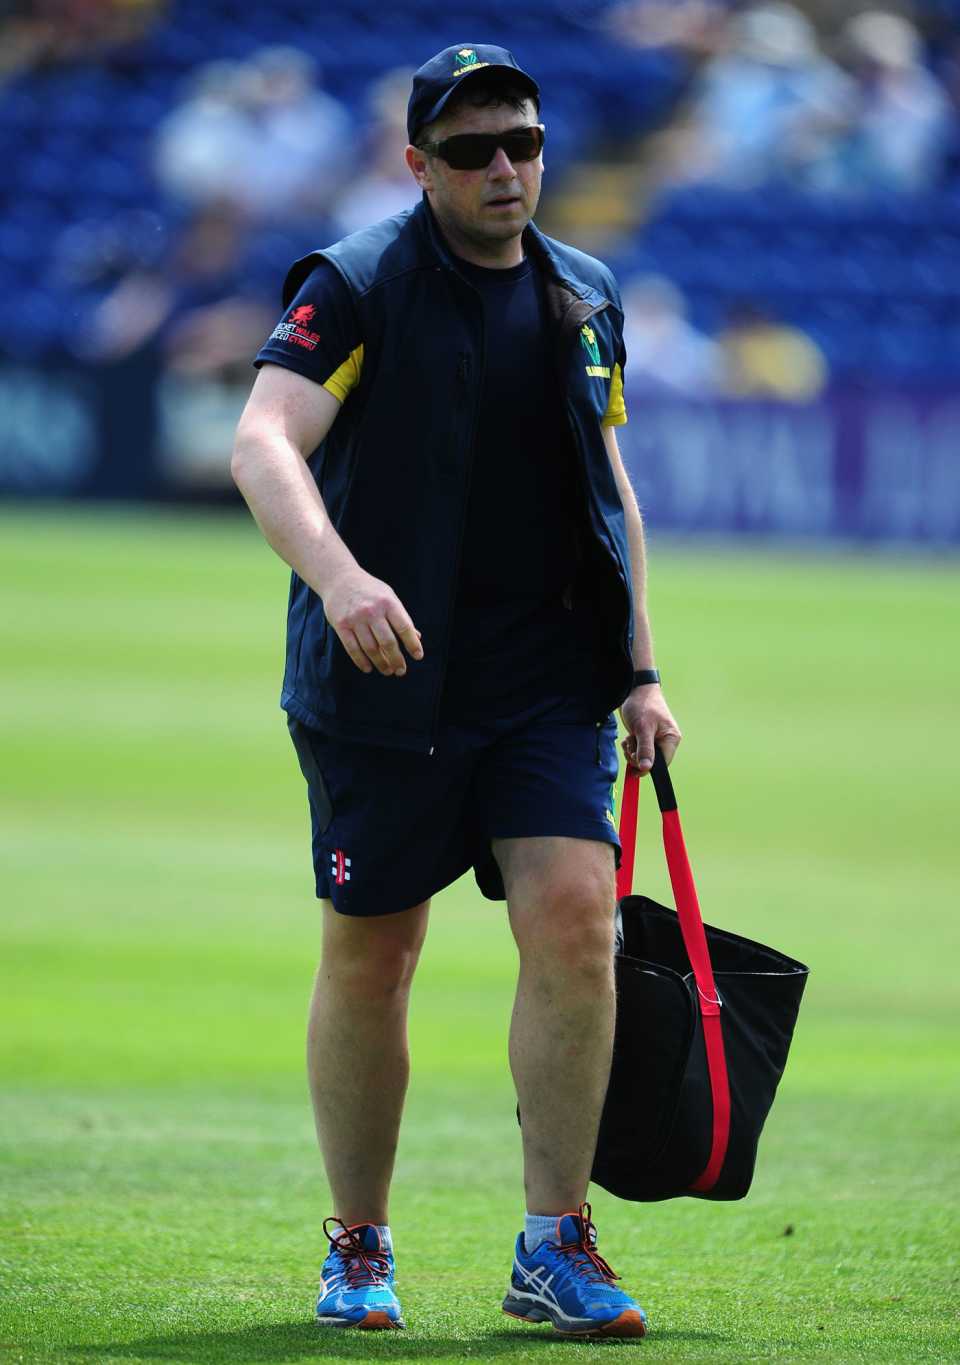 Robert Croft has had a testing time since taking over as Glamorgan coach